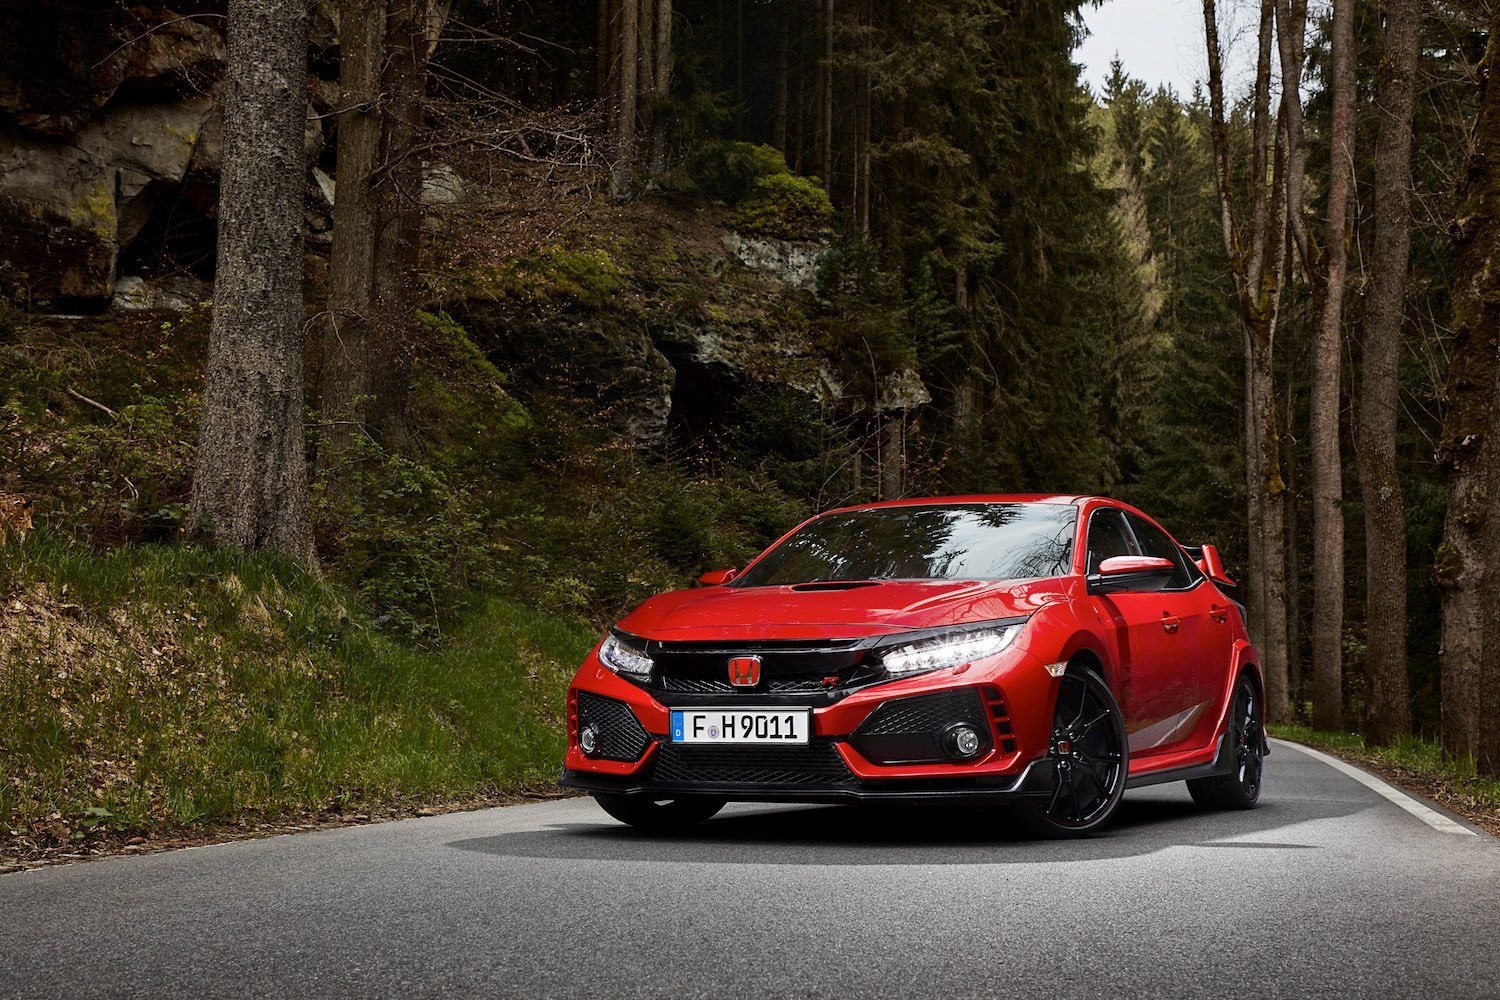 Tim Barnes-Clay reviews the 2018 Honda Civic Type R at the first drives 16